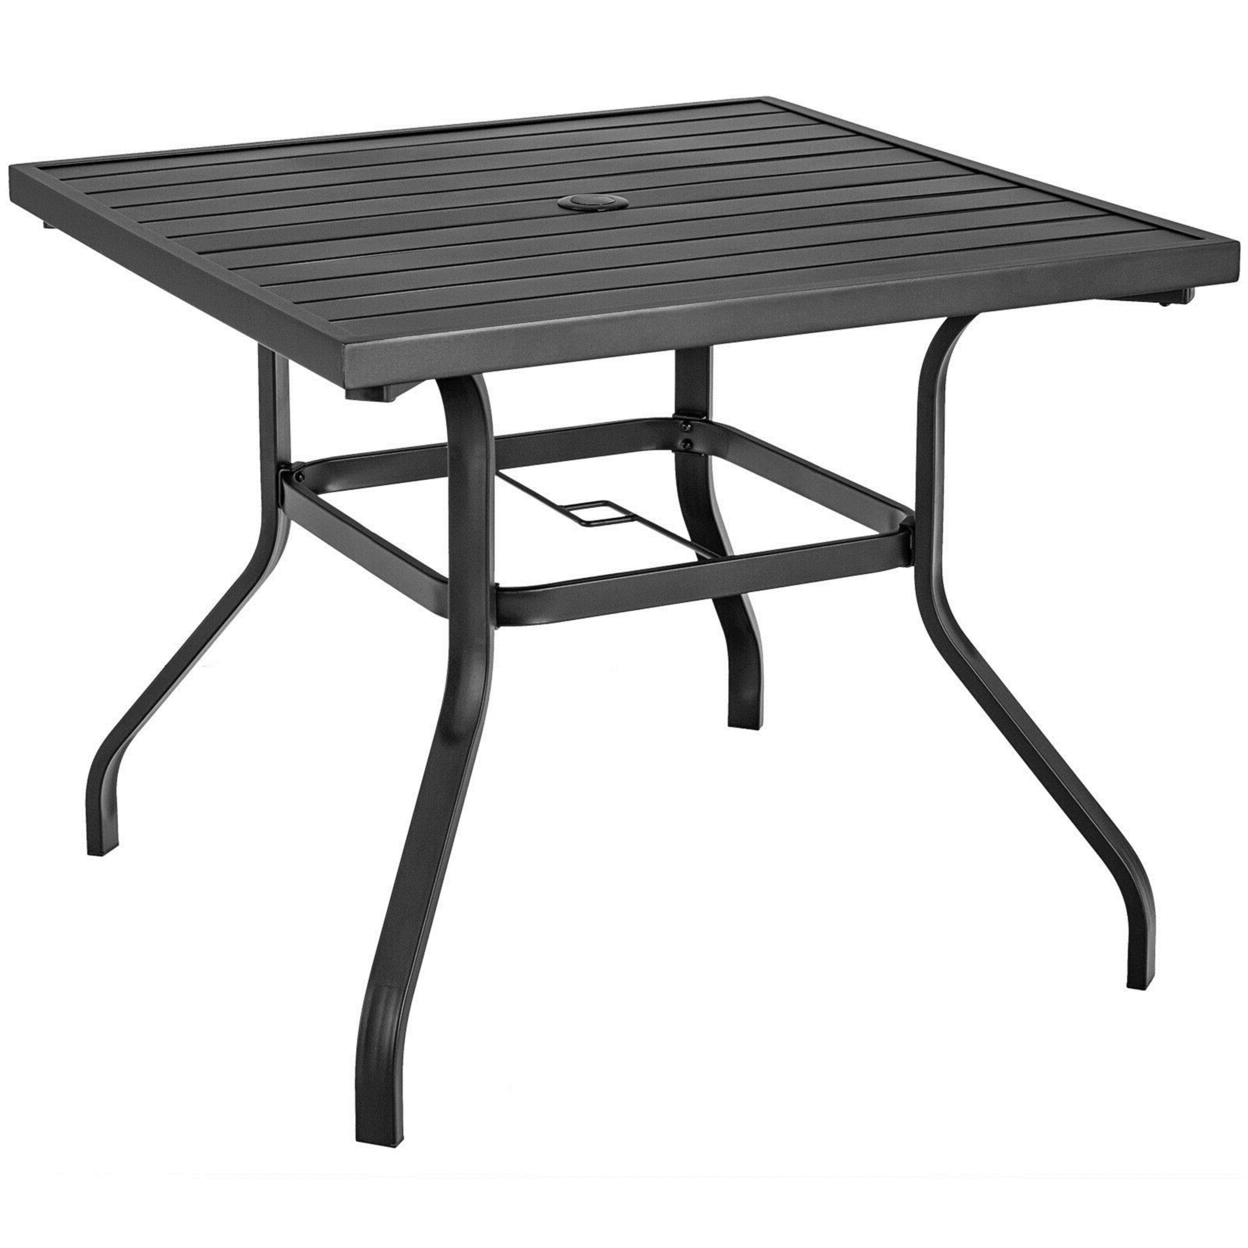 Square Patio Dining Table Metal 4-Person Outdoor Table W/ Umbrella Hole